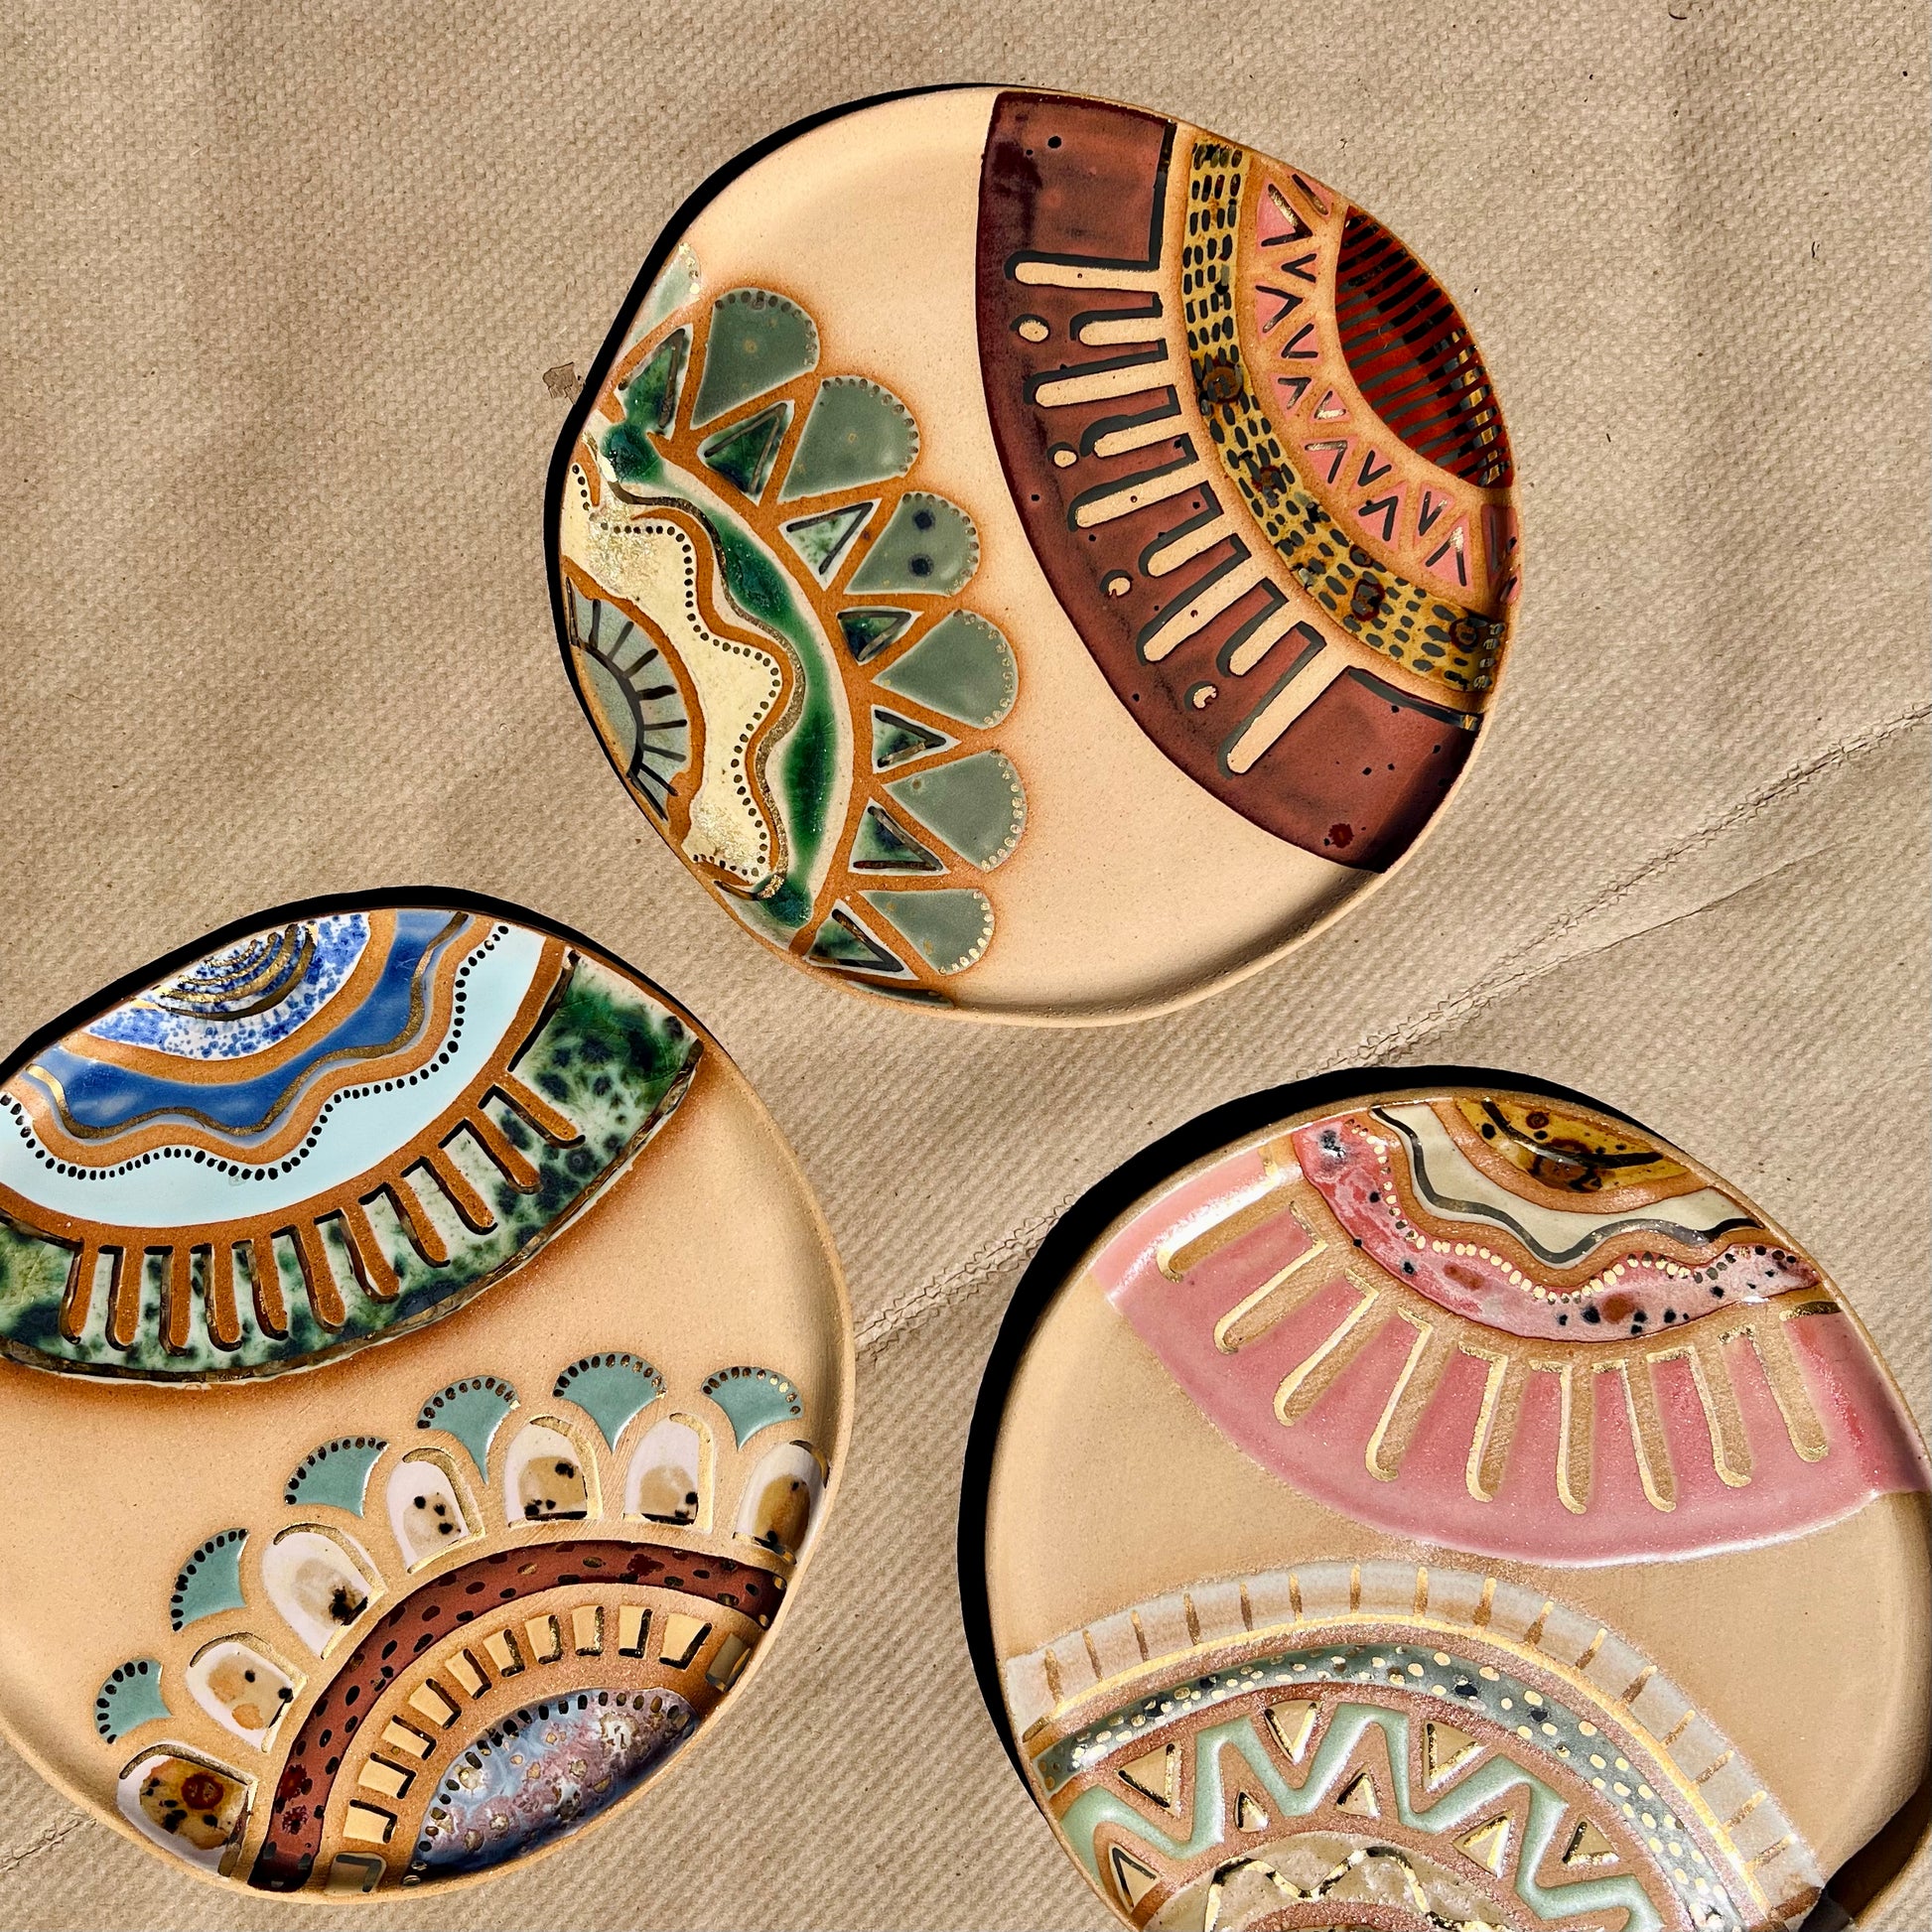 Handmade ceramic dish featuring fun designs and gold luster accents.